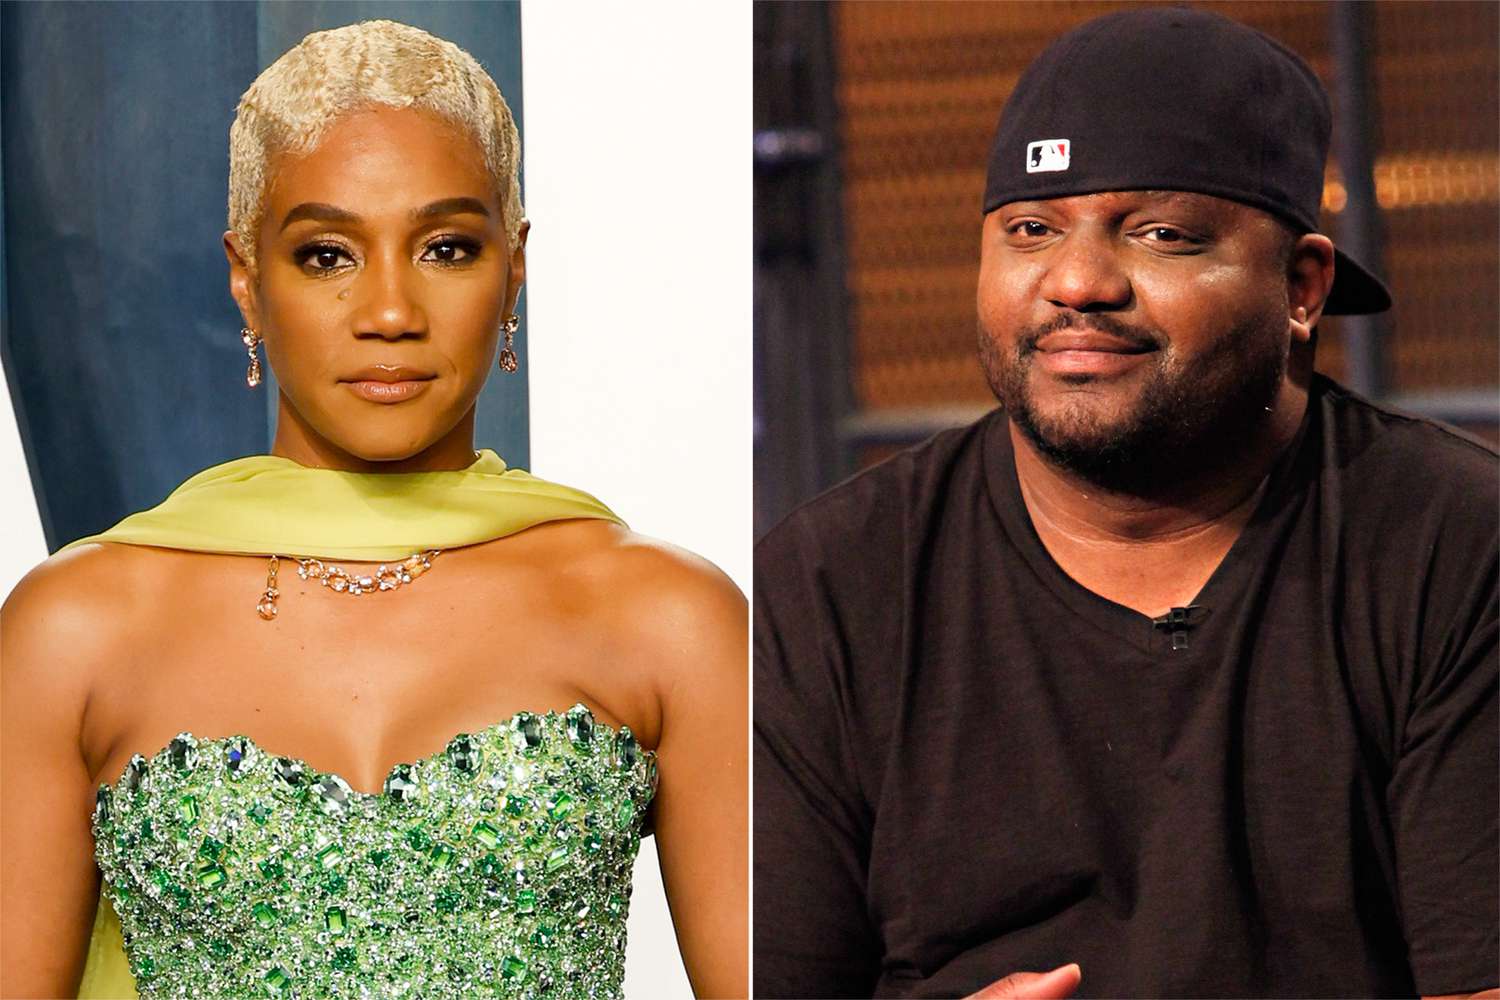 Child sexual abuse claims against Tiffany Haddish and Aries Spears dismissed